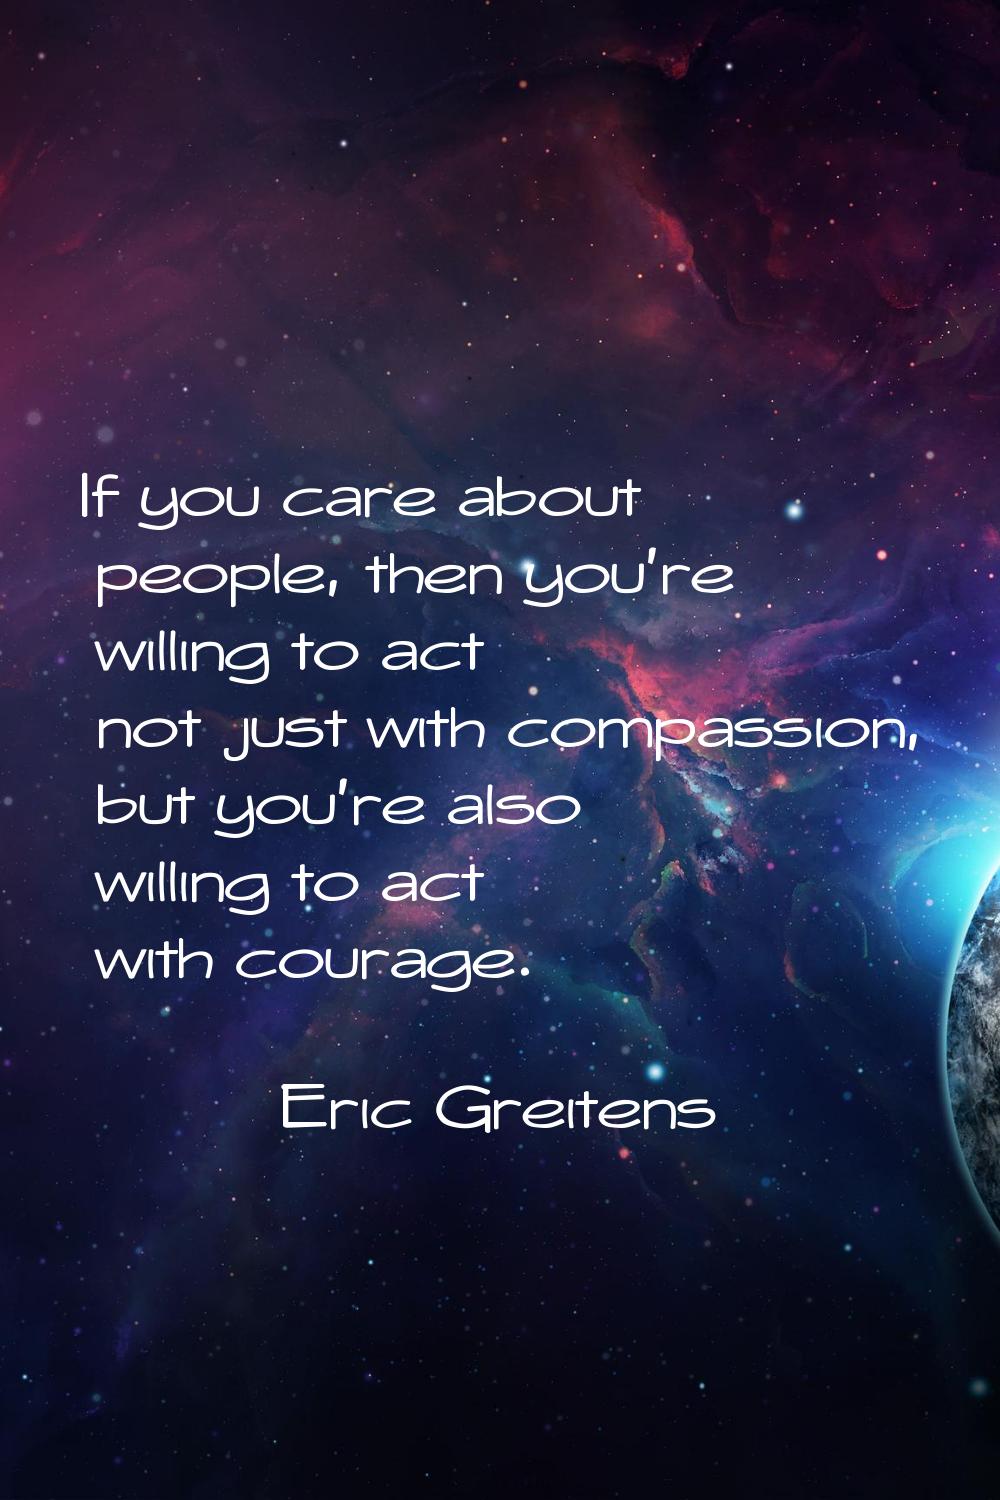 If you care about people, then you're willing to act not just with compassion, but you're also will